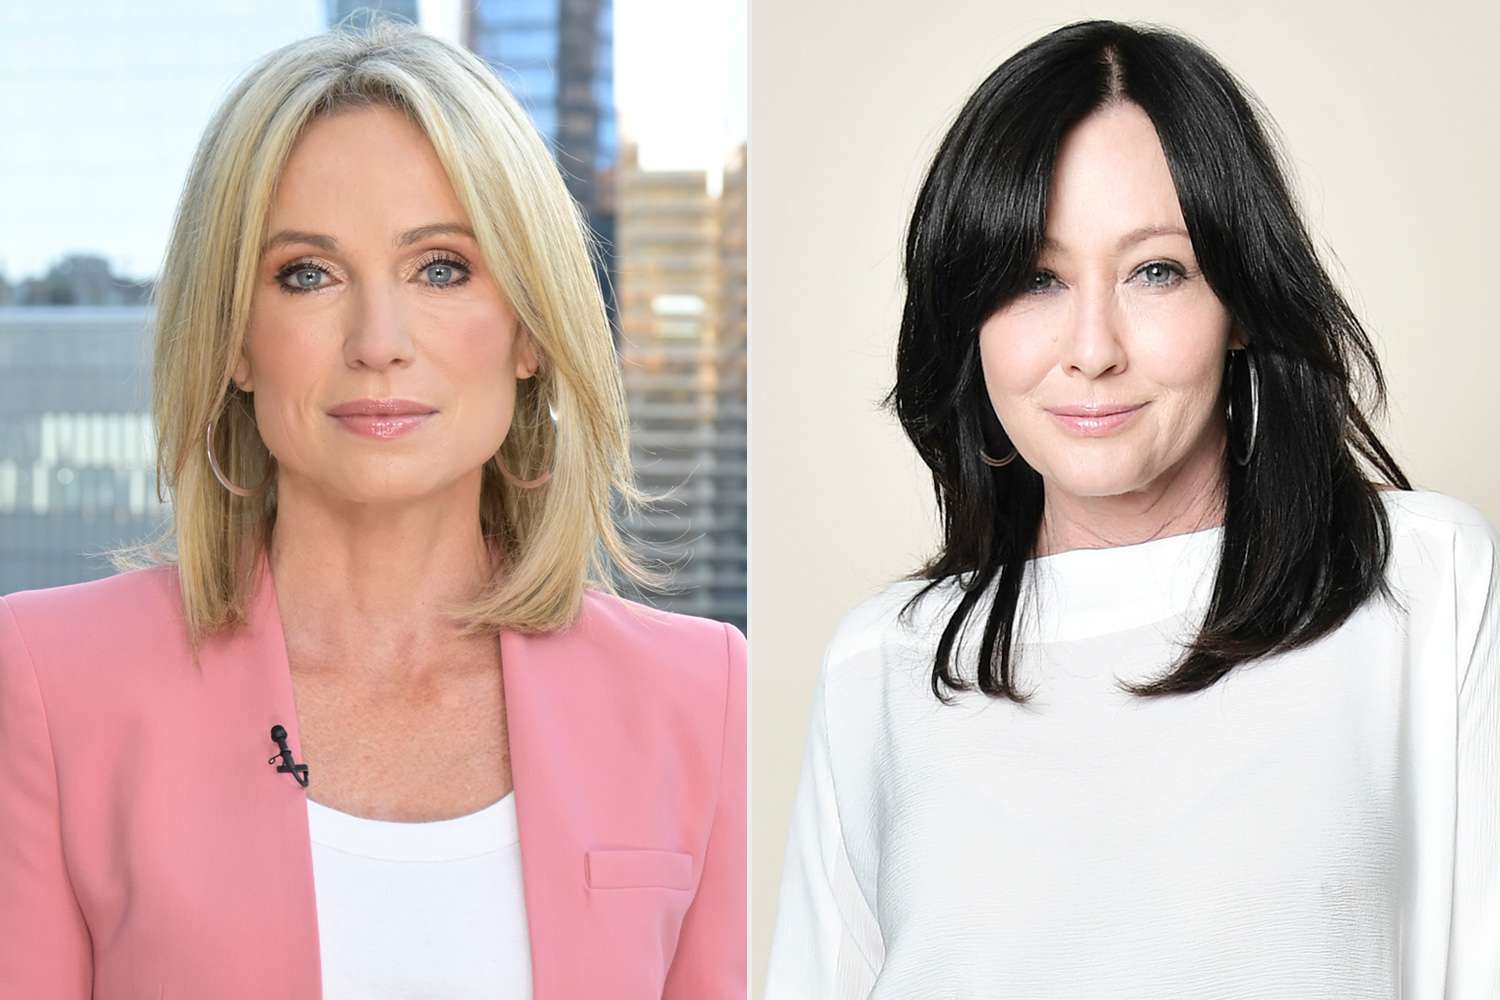 Amy Robach Says She 'Always Marveled' at Shannen Doherty's 'Bravery' amid Their Cancer Journeys